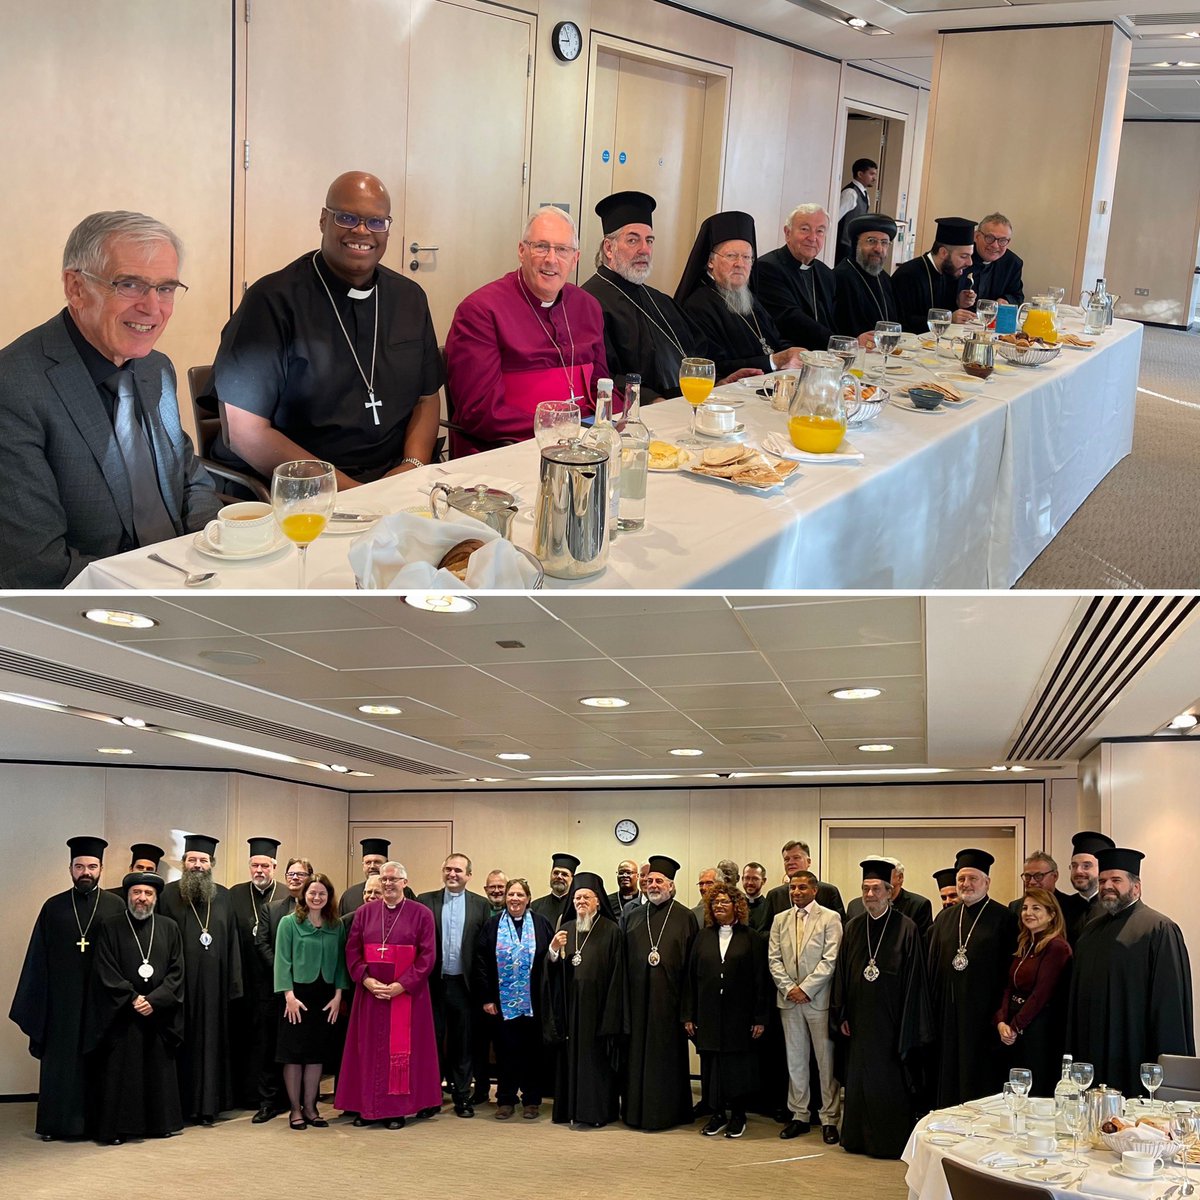 Leaders breakfast welcoming His All-Holiness Patriarch Bartholomew of the Orthodox Church. Inspiring words of unity, peace, social justice and environmental responsibility…#Church